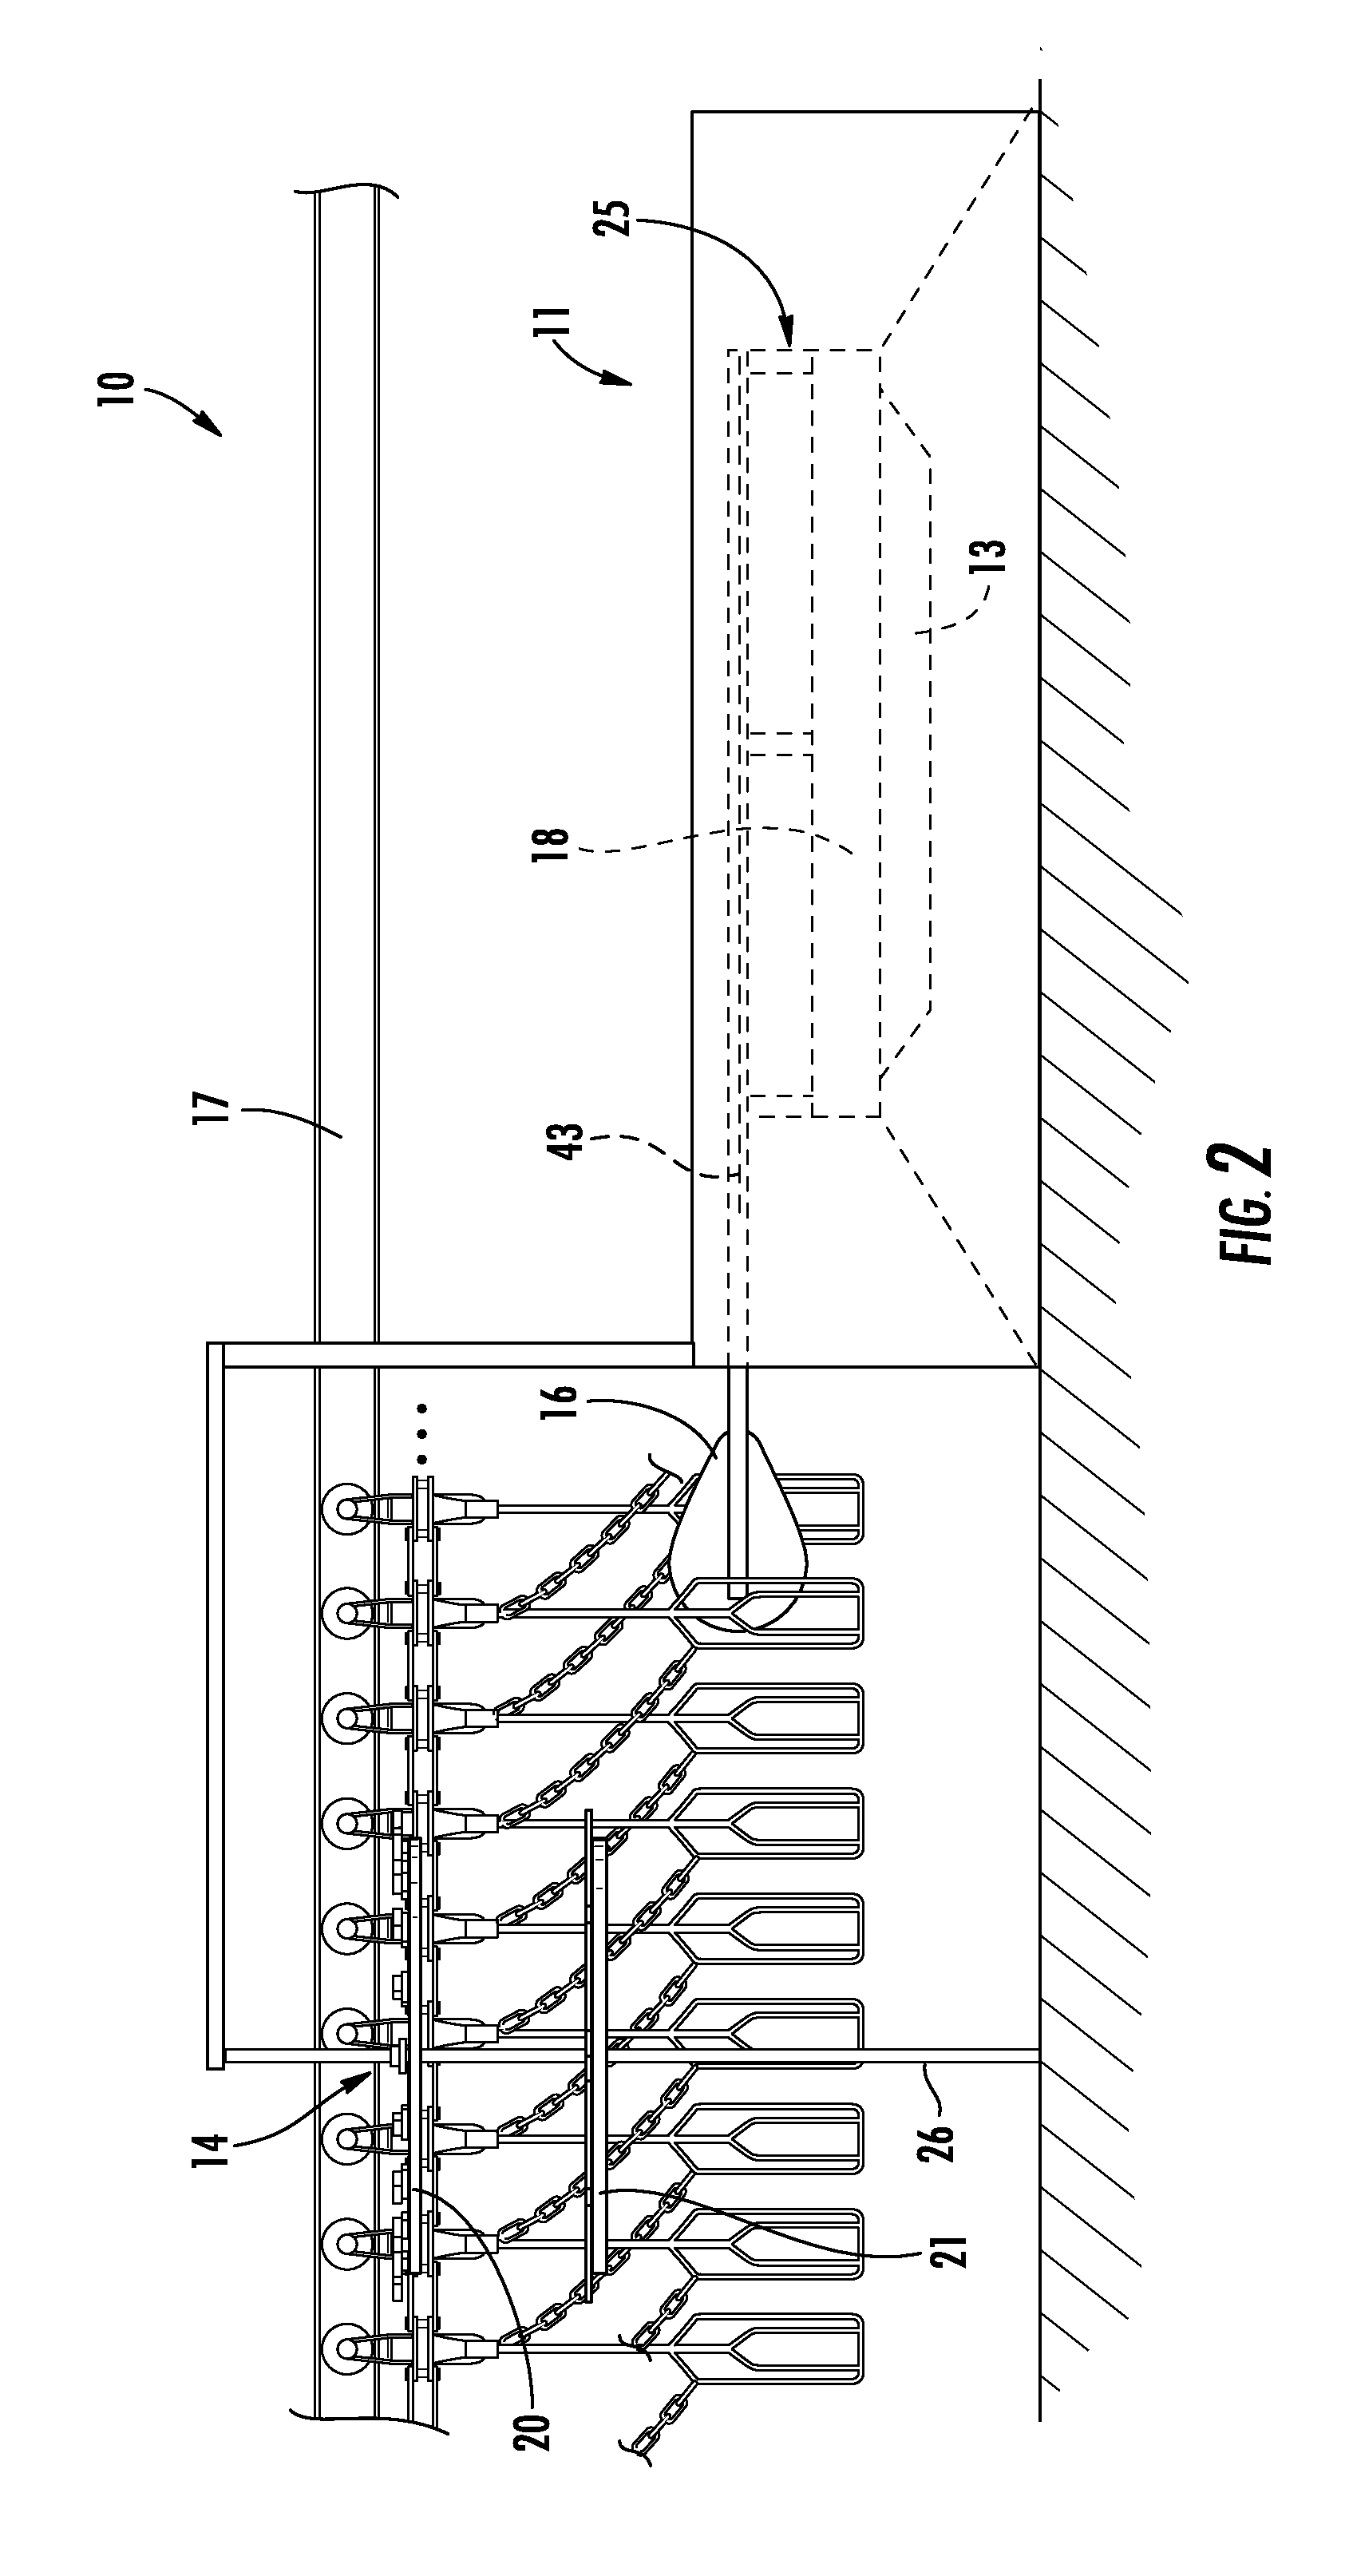 Apparatus and method for stunning poultry with minimum damage to the poultry products